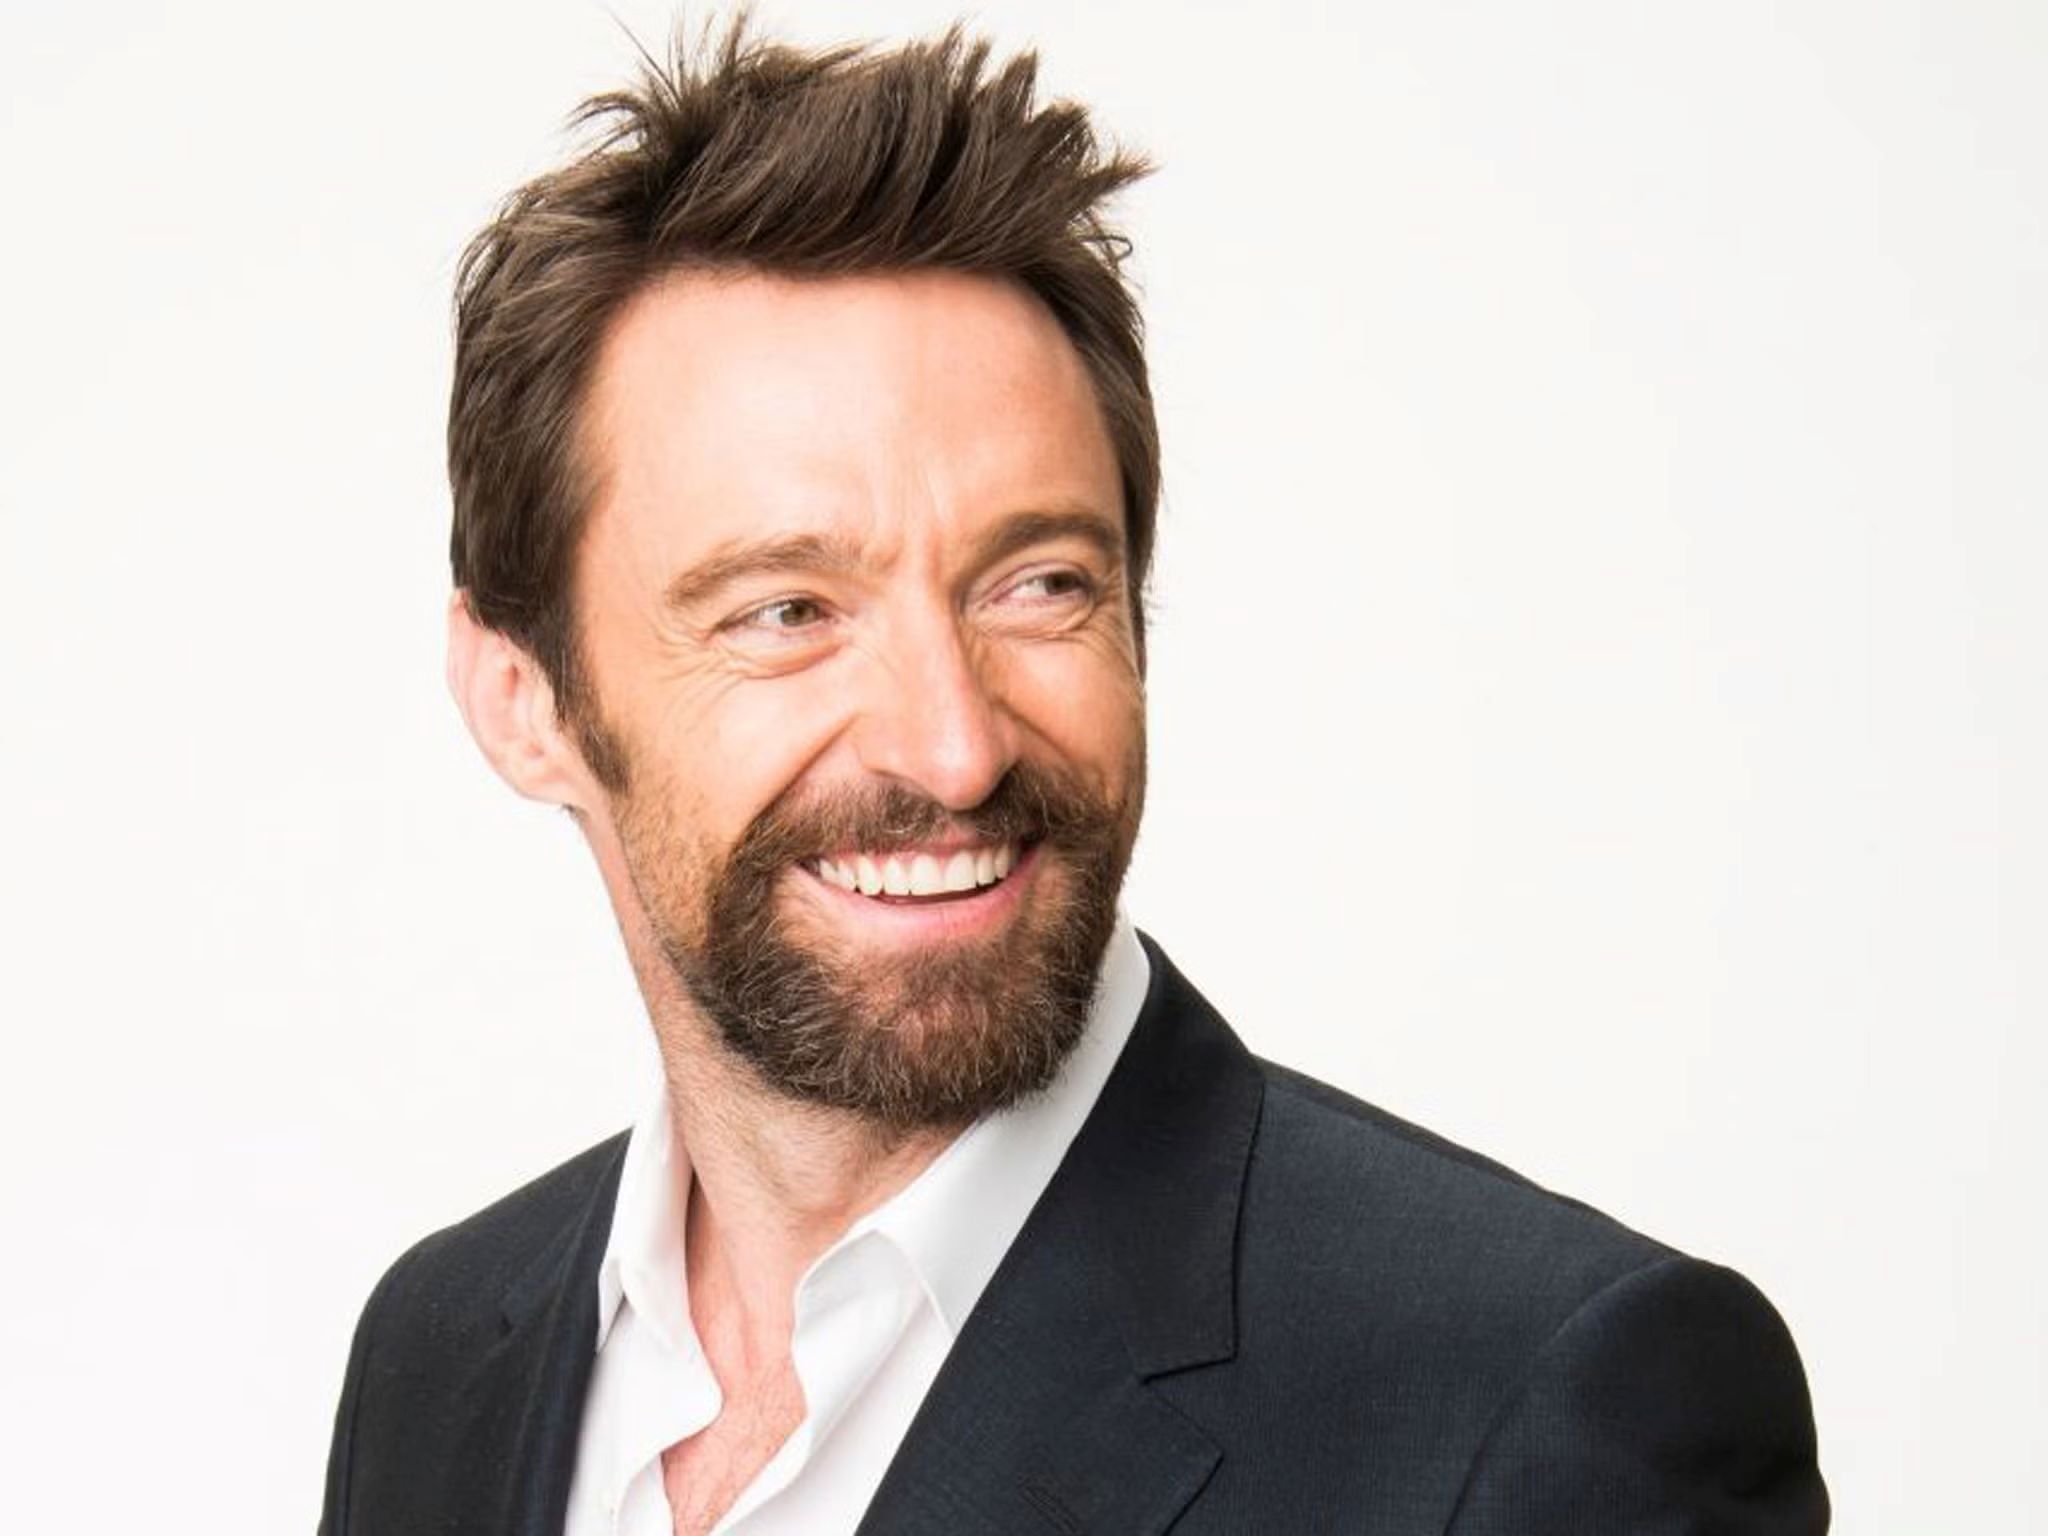 hugh-jackman-opens-up-about-difficult-split-with-wife